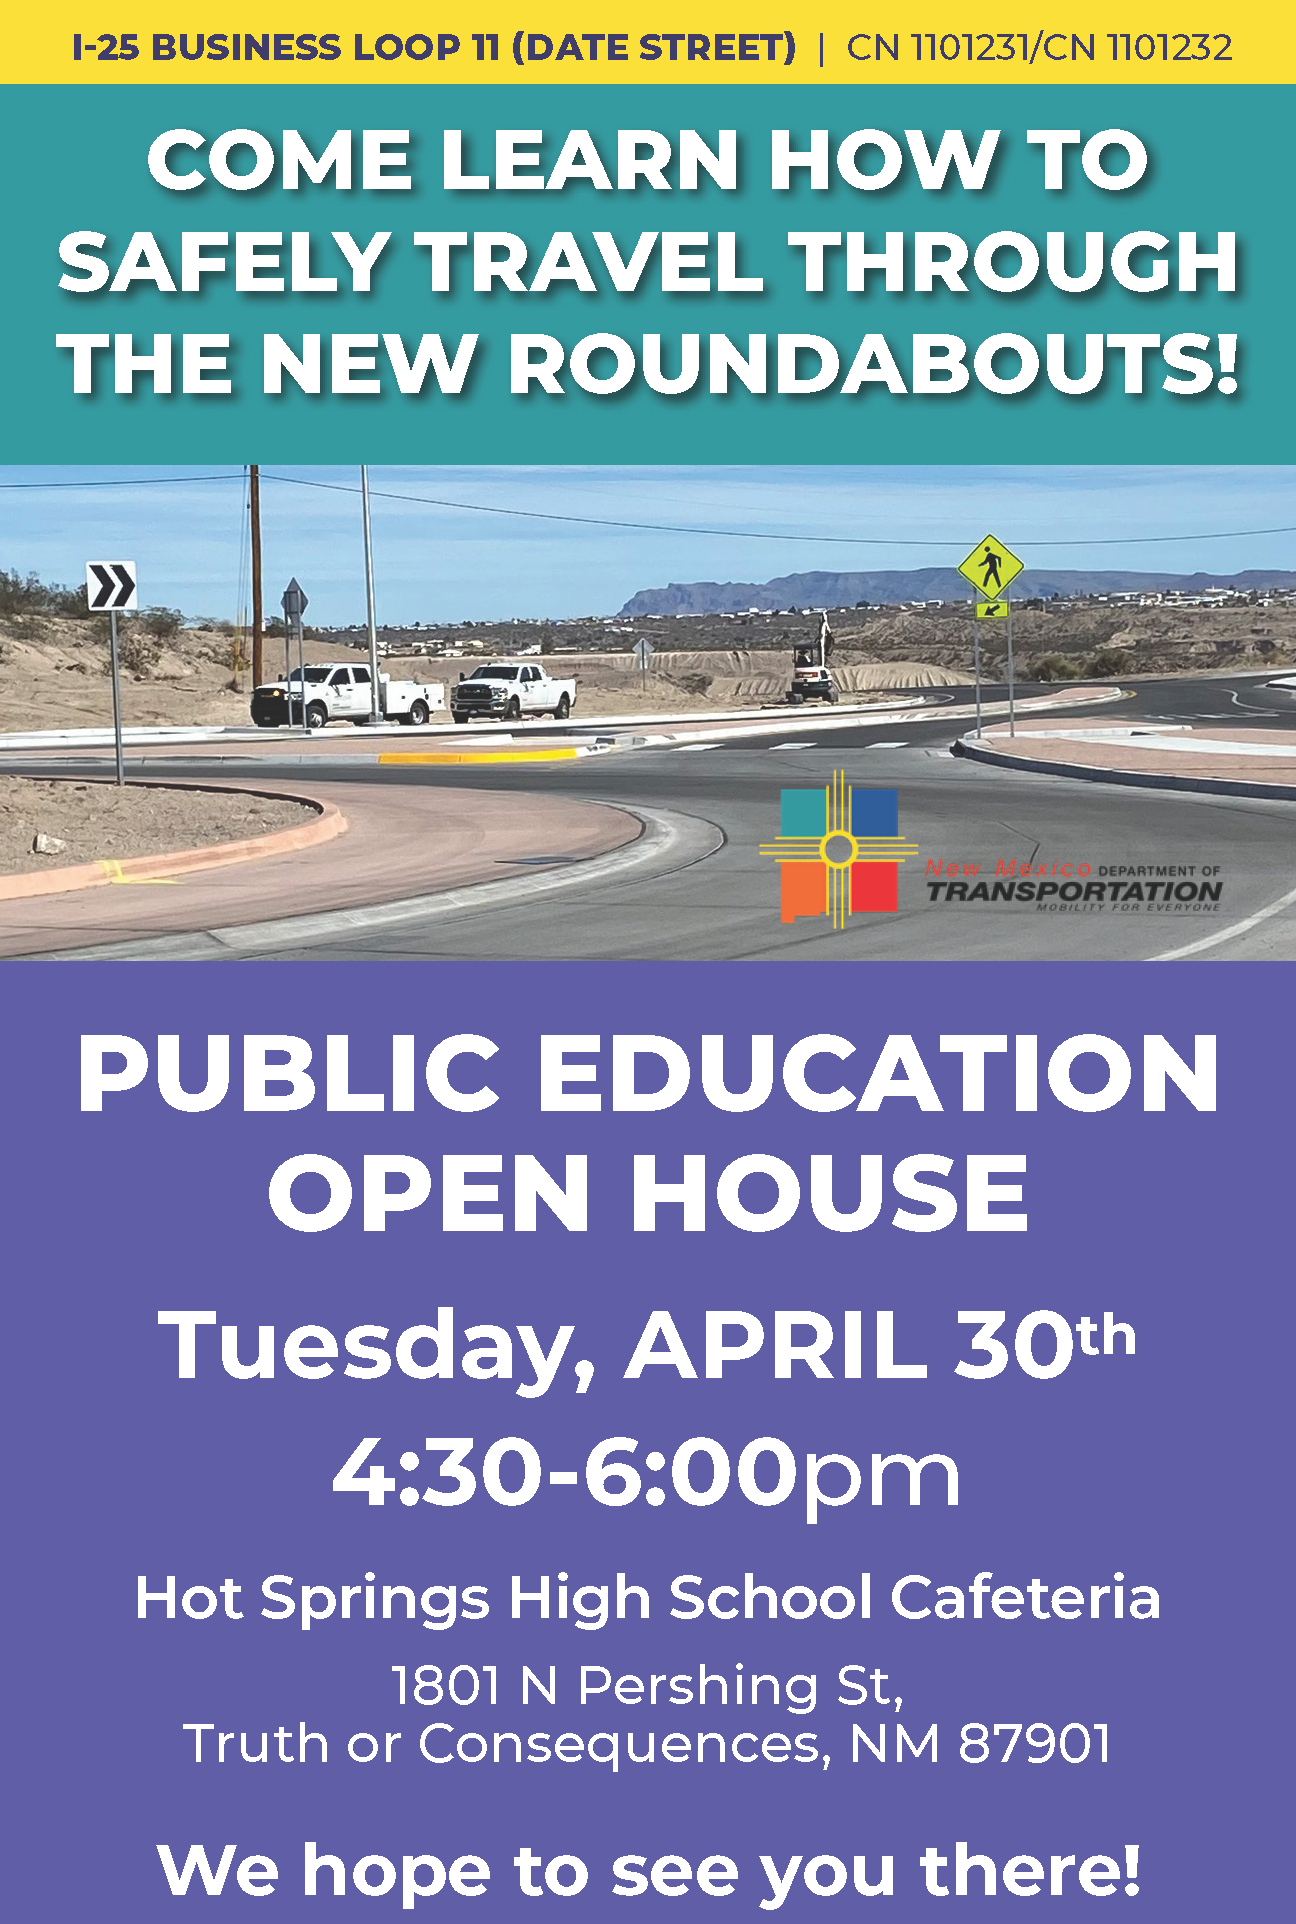 Open House Announcement in Truth or Consequences regarding guidance and education on how use of the new roundabouts